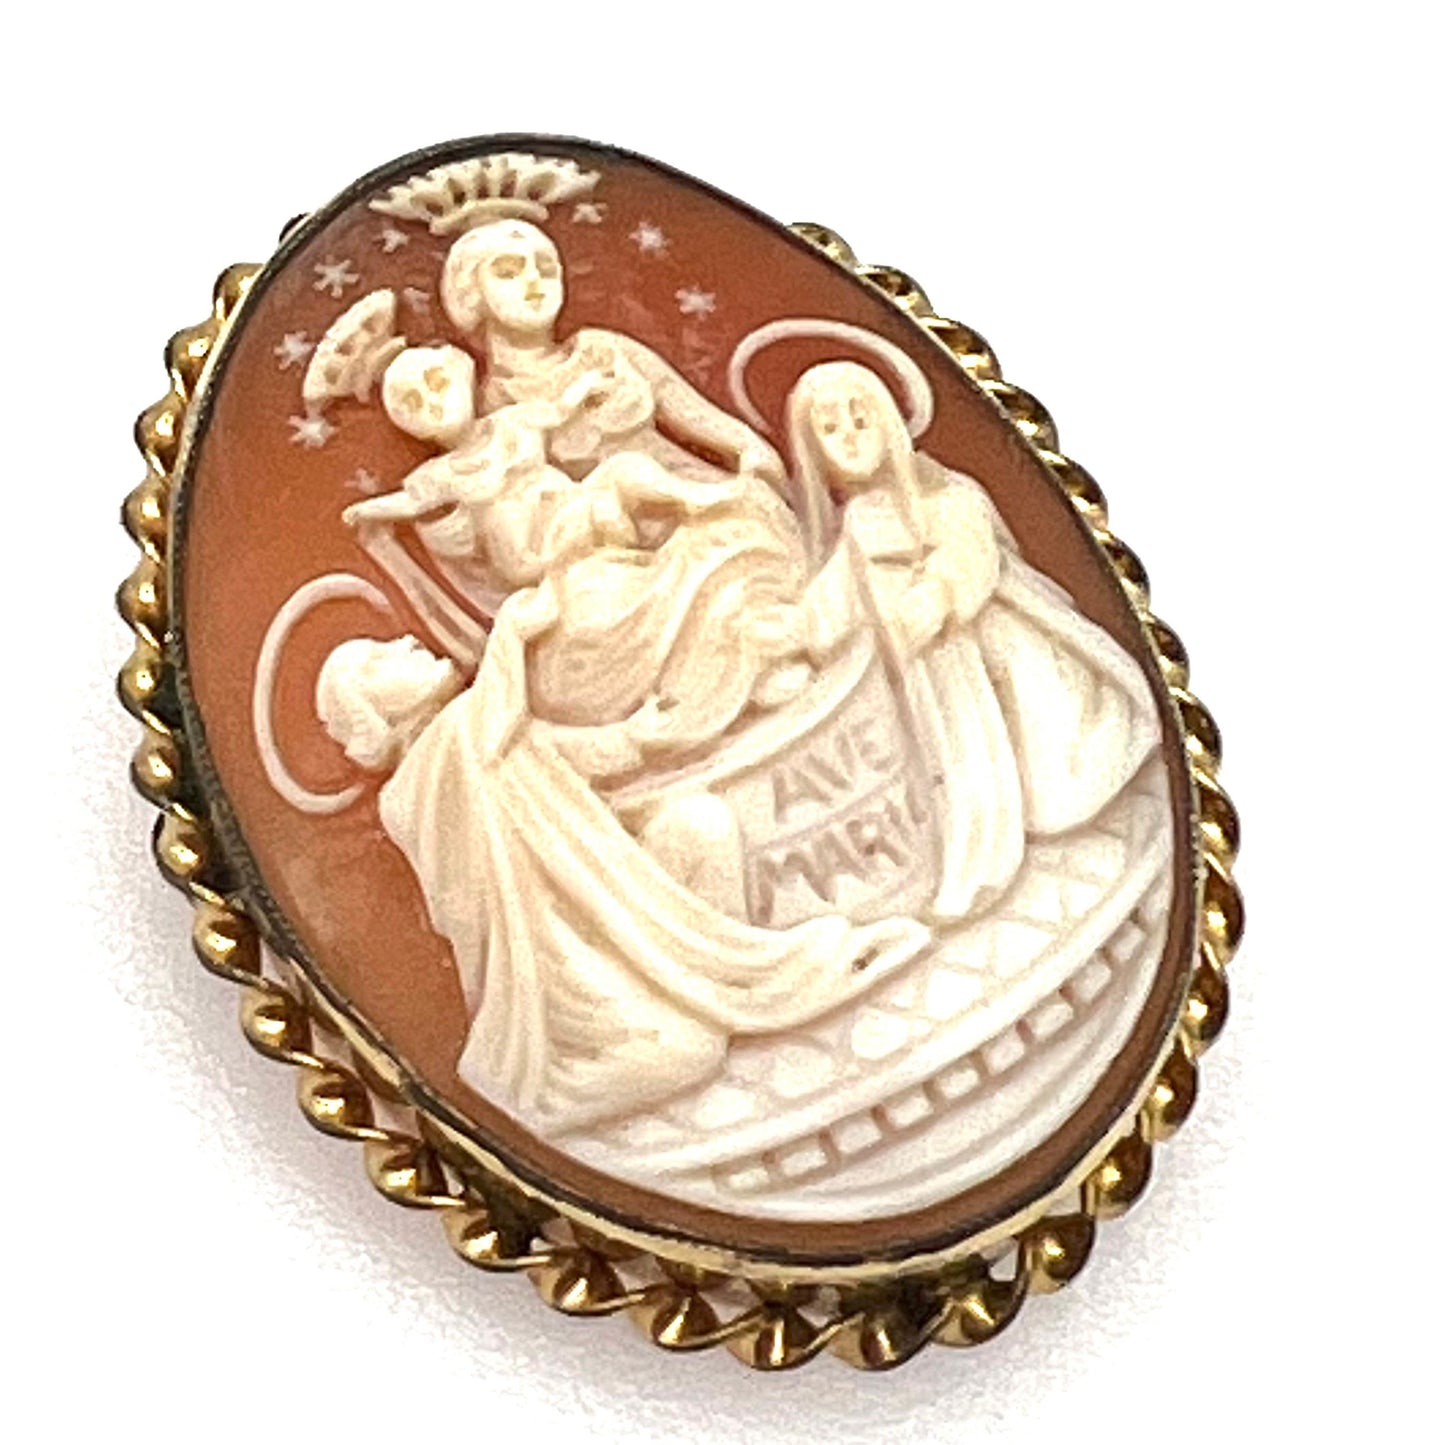 L.S. Peterson 12K Gold Filled Highly Detailed Our Lady of Mount Carmel Shell Cameo Brooch/Pendant